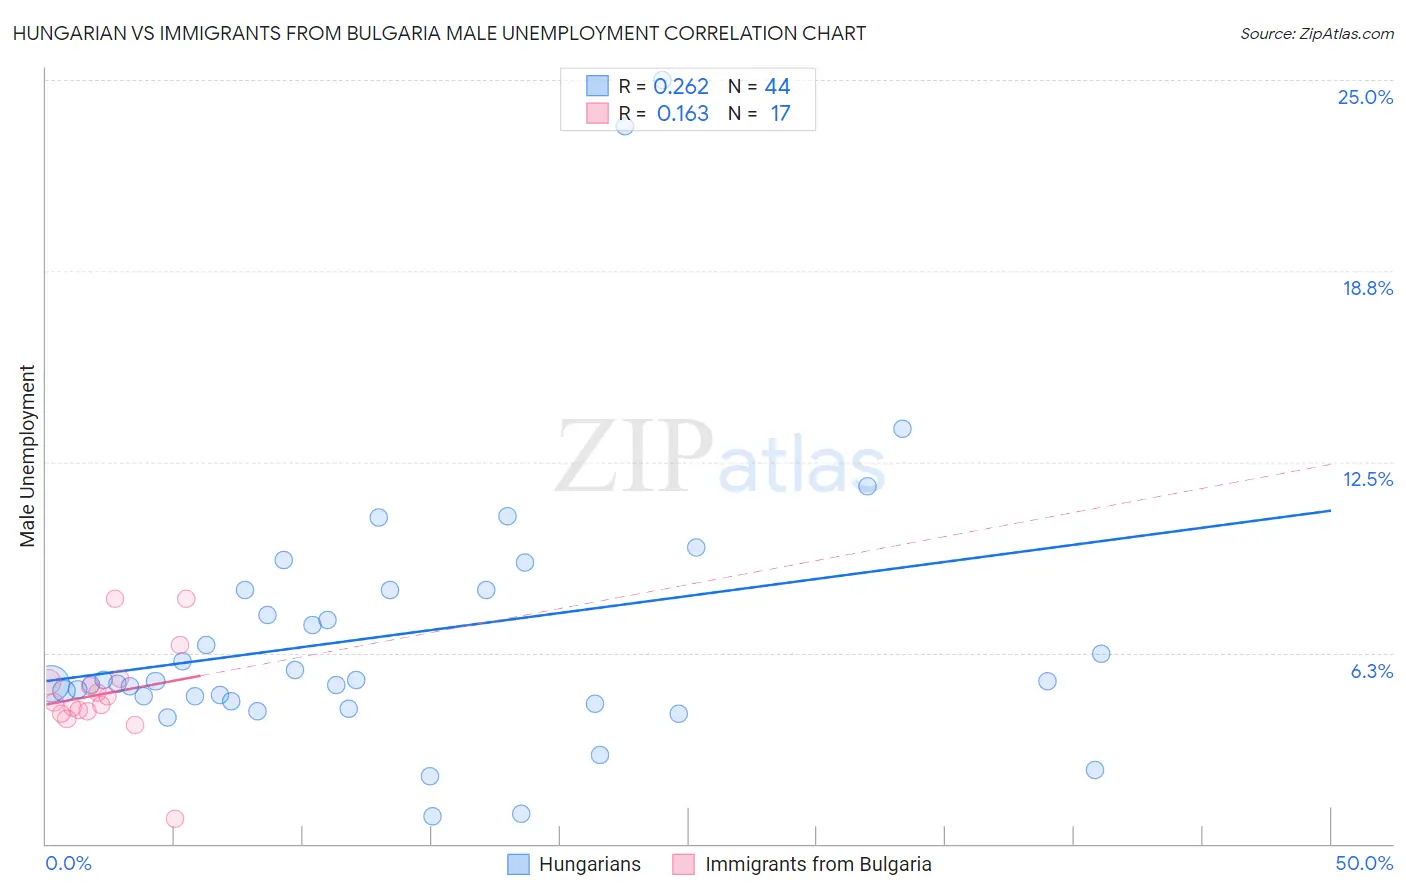 Hungarian vs Immigrants from Bulgaria Male Unemployment